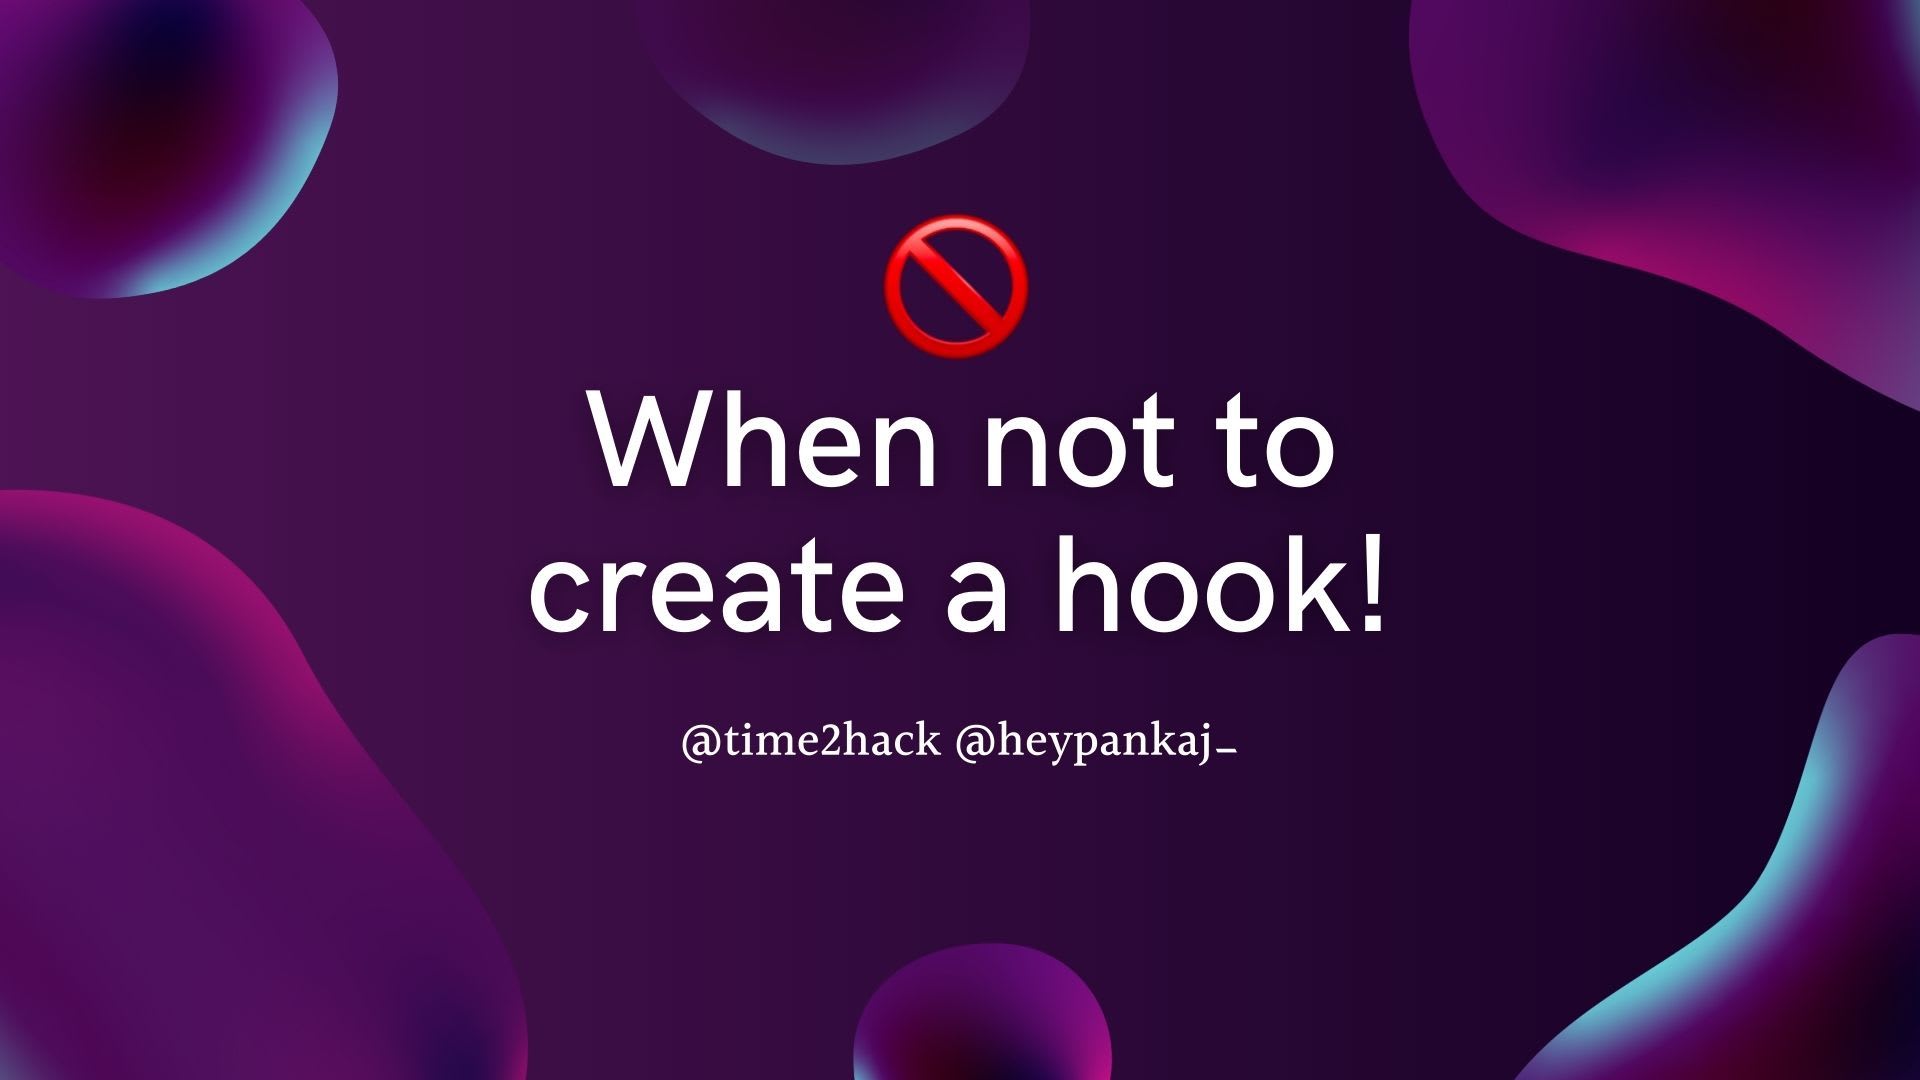 ❌ When not to create a hook!